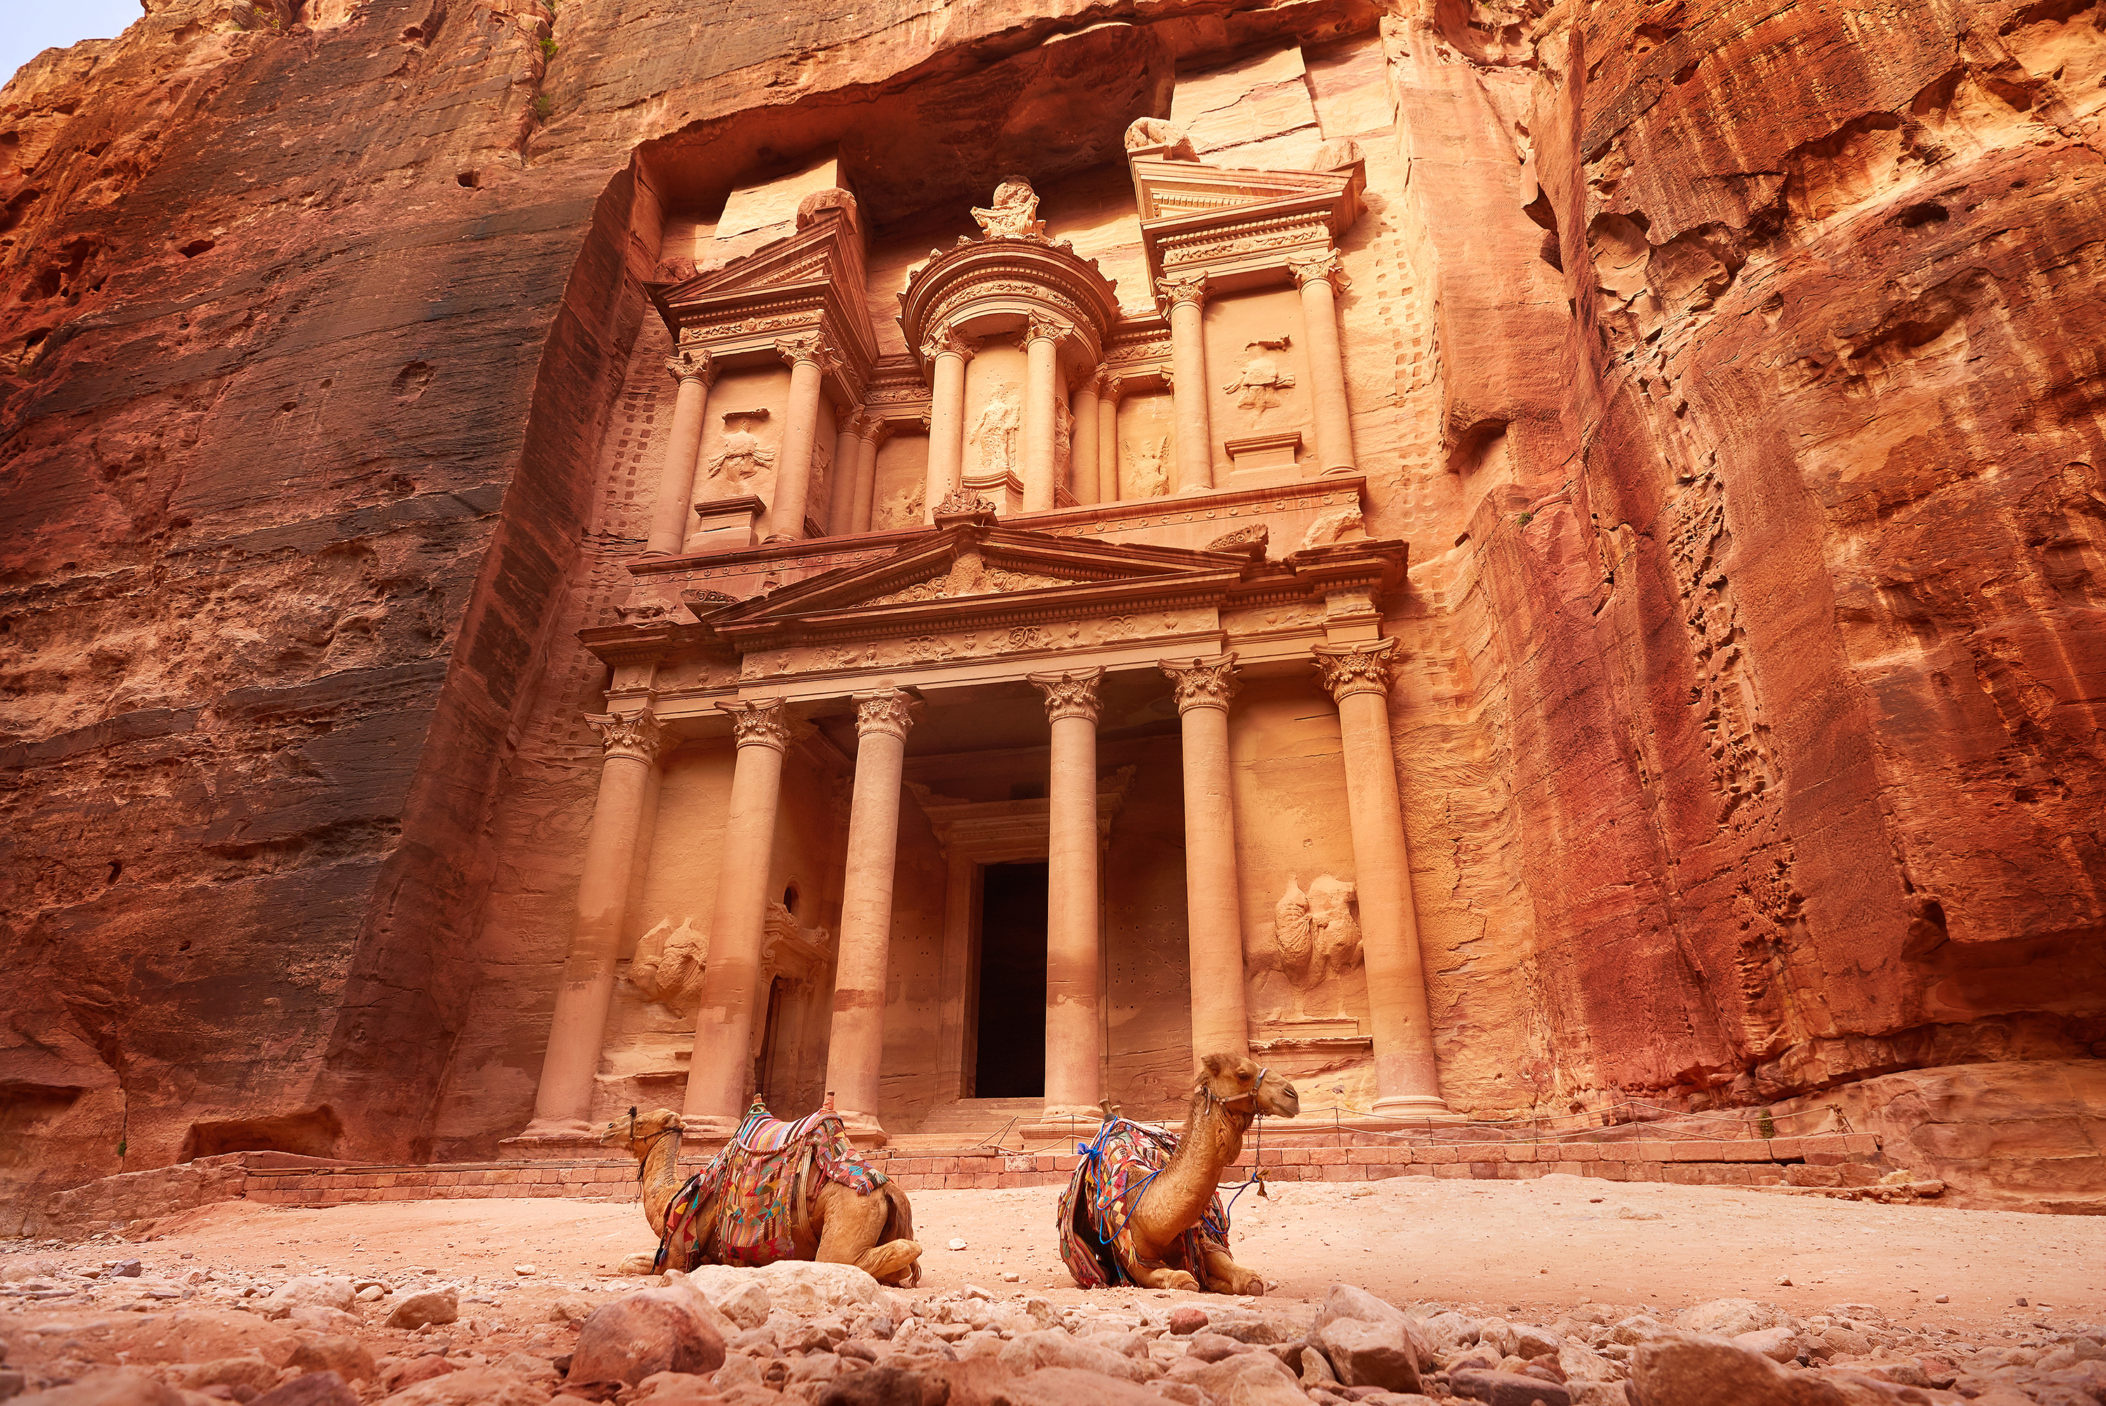 Jordan United States Department, Middle Eastern country, Cultural heritage, Historical sites, 2110x1410 HD Desktop